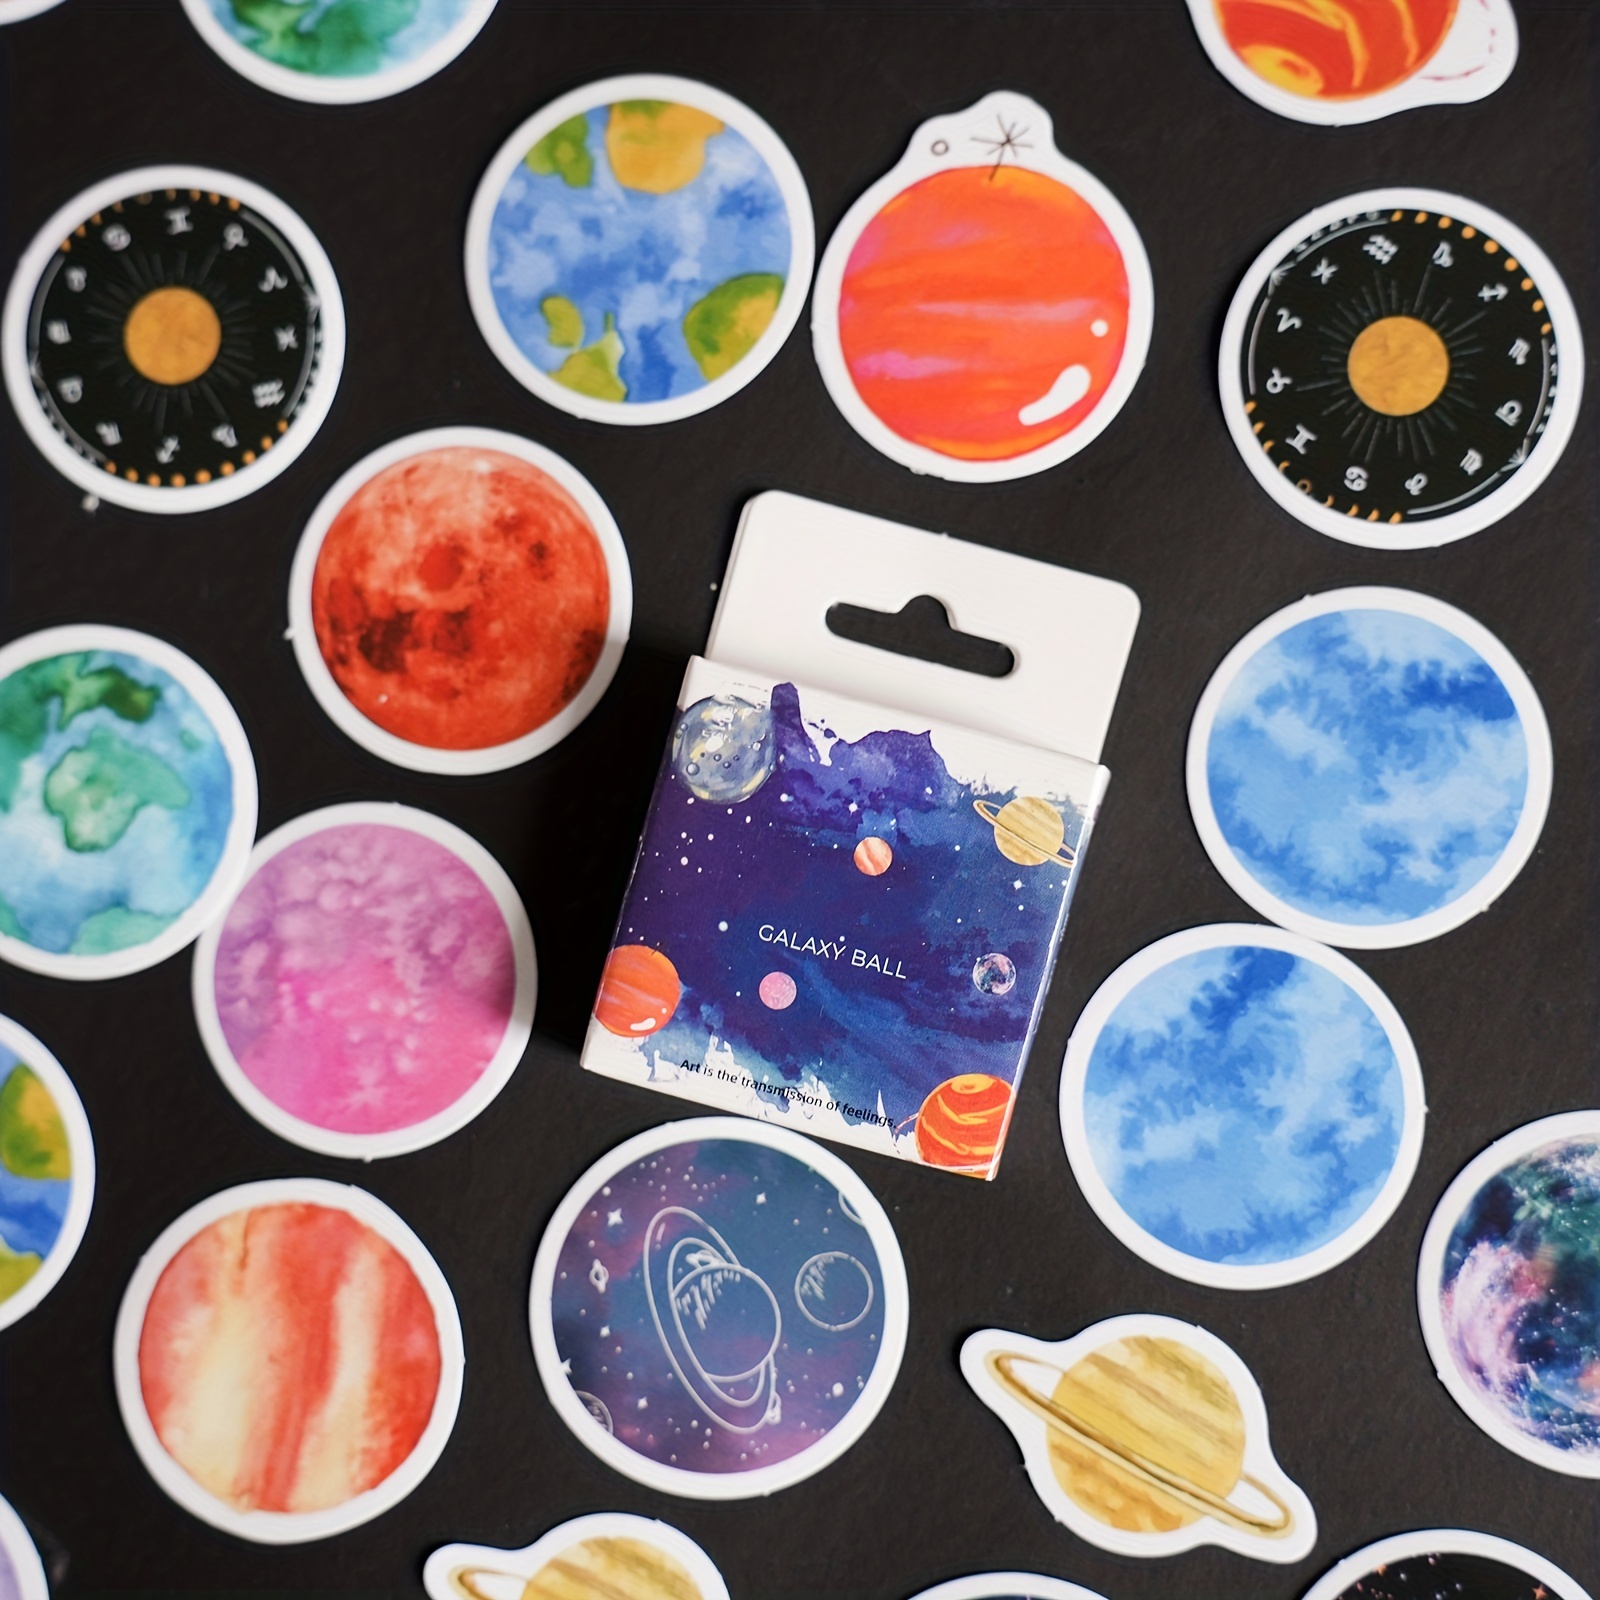 46Pcs Vintage Astronomy Celestial Stickers Set Decorative Space Planets  Galaxy Sun Moon Astronomy Planner Sticker for